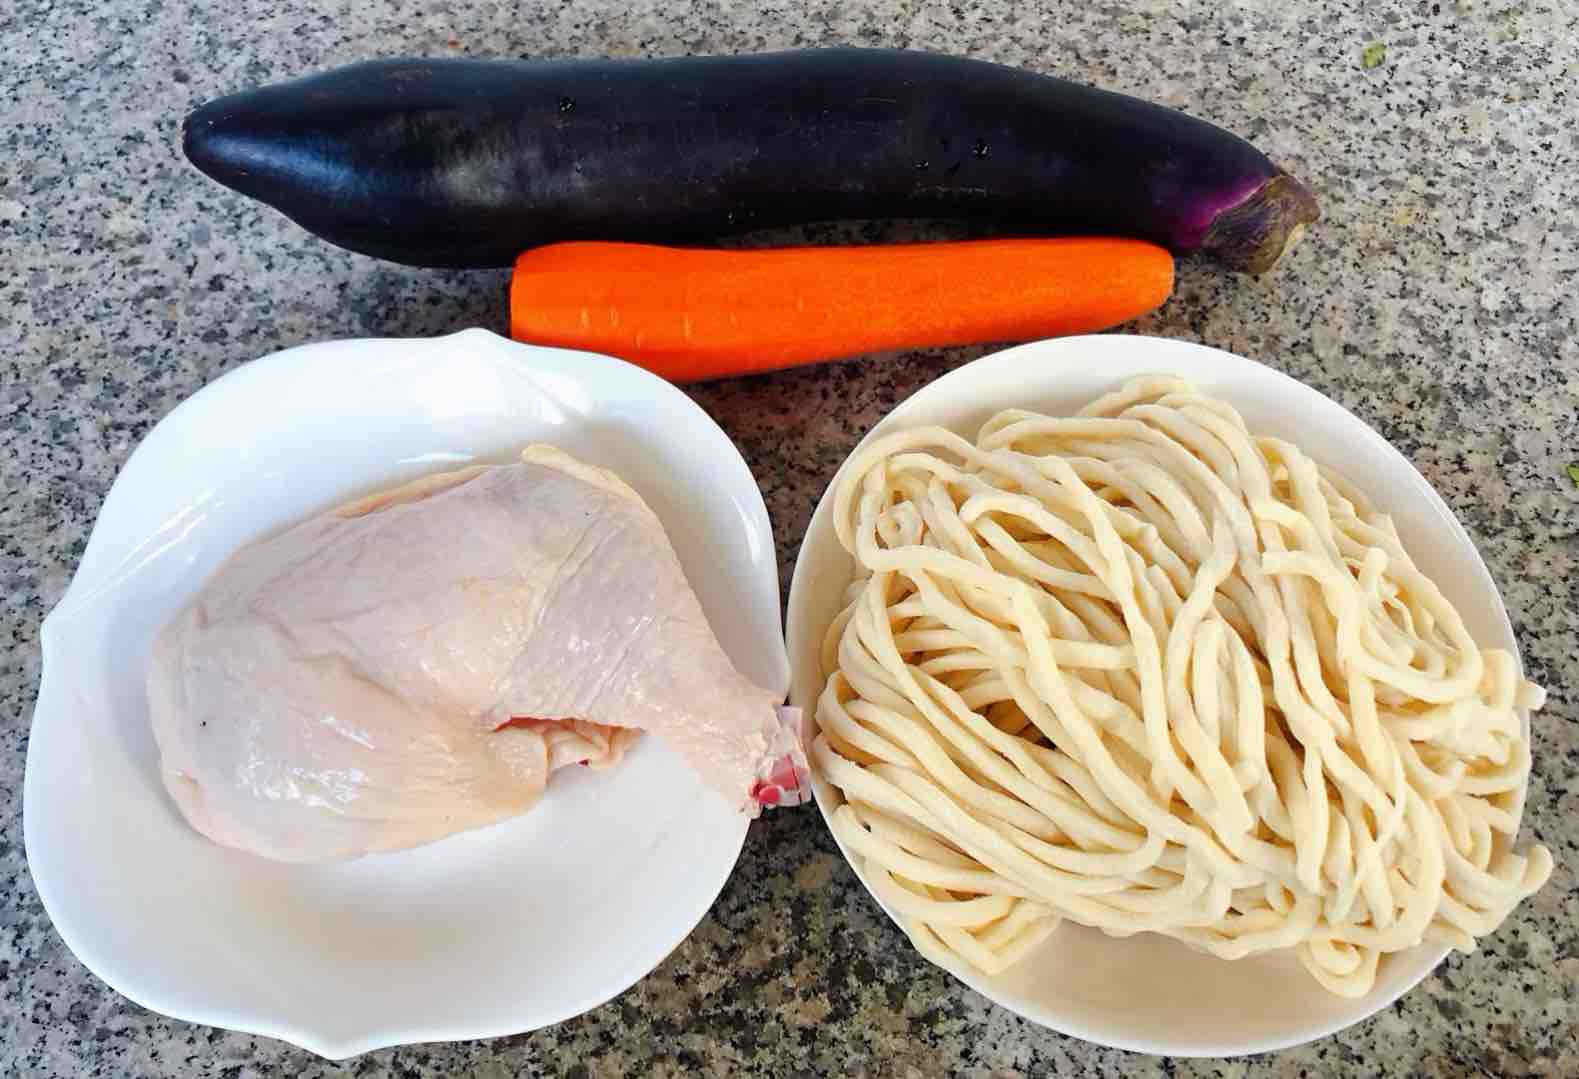 Braised Noodles with Chicken Drumsticks and Eggplant recipe